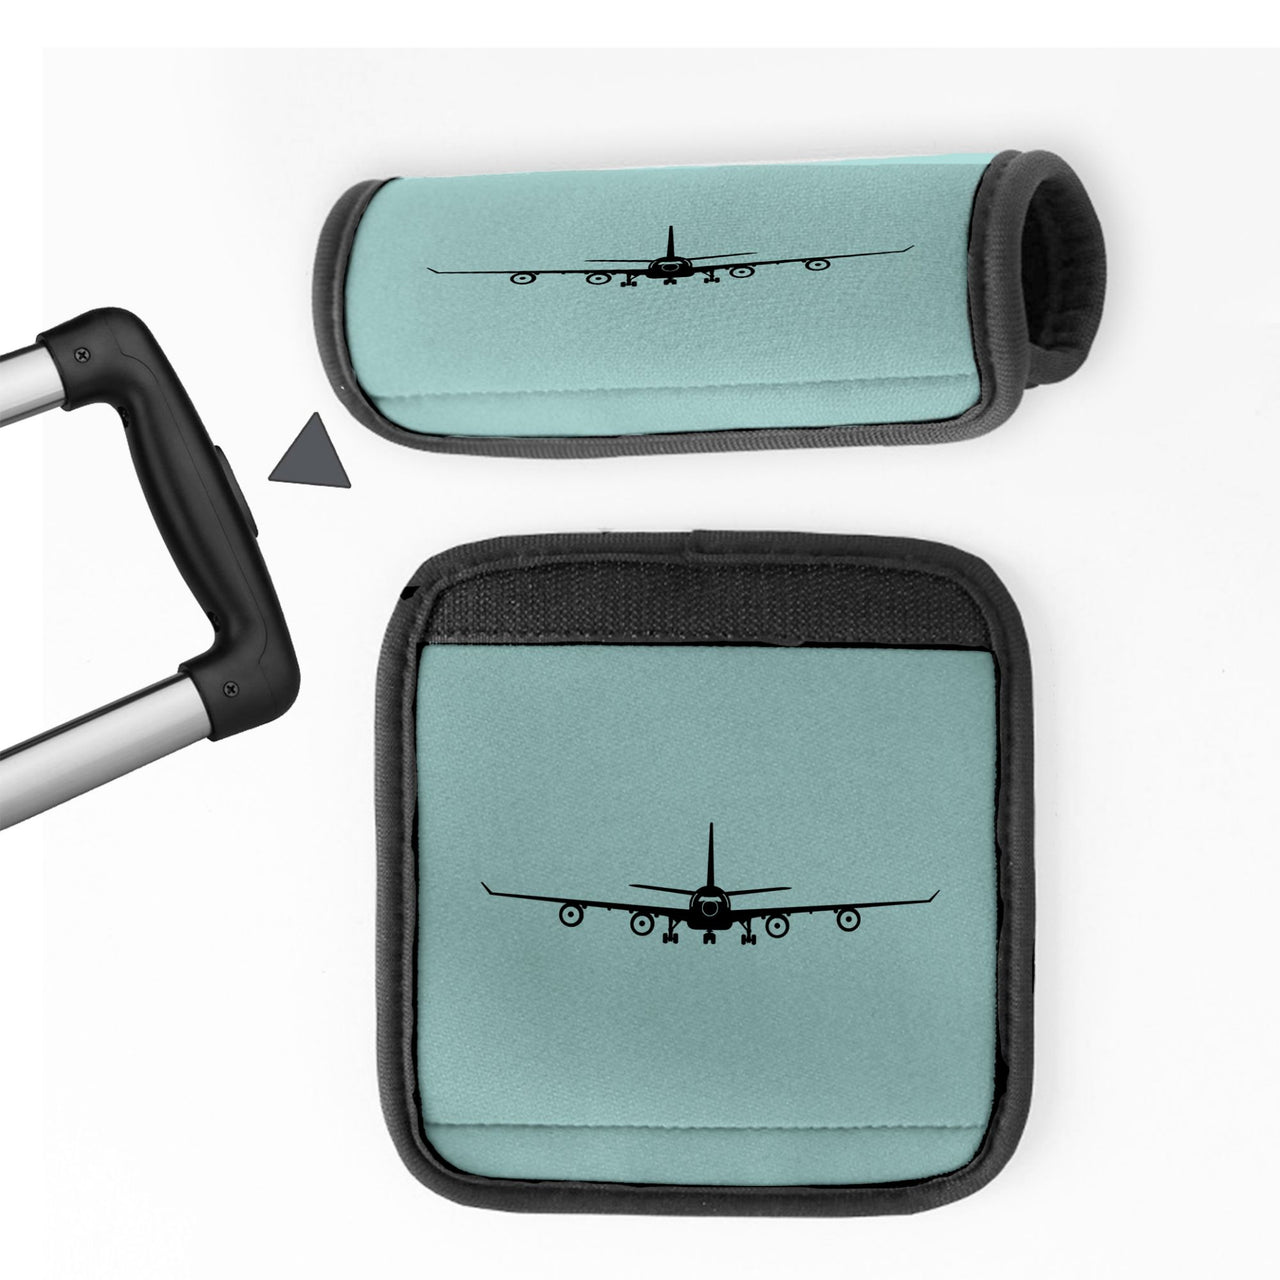 Airbus A340 Silhouette Designed Neoprene Luggage Handle Covers